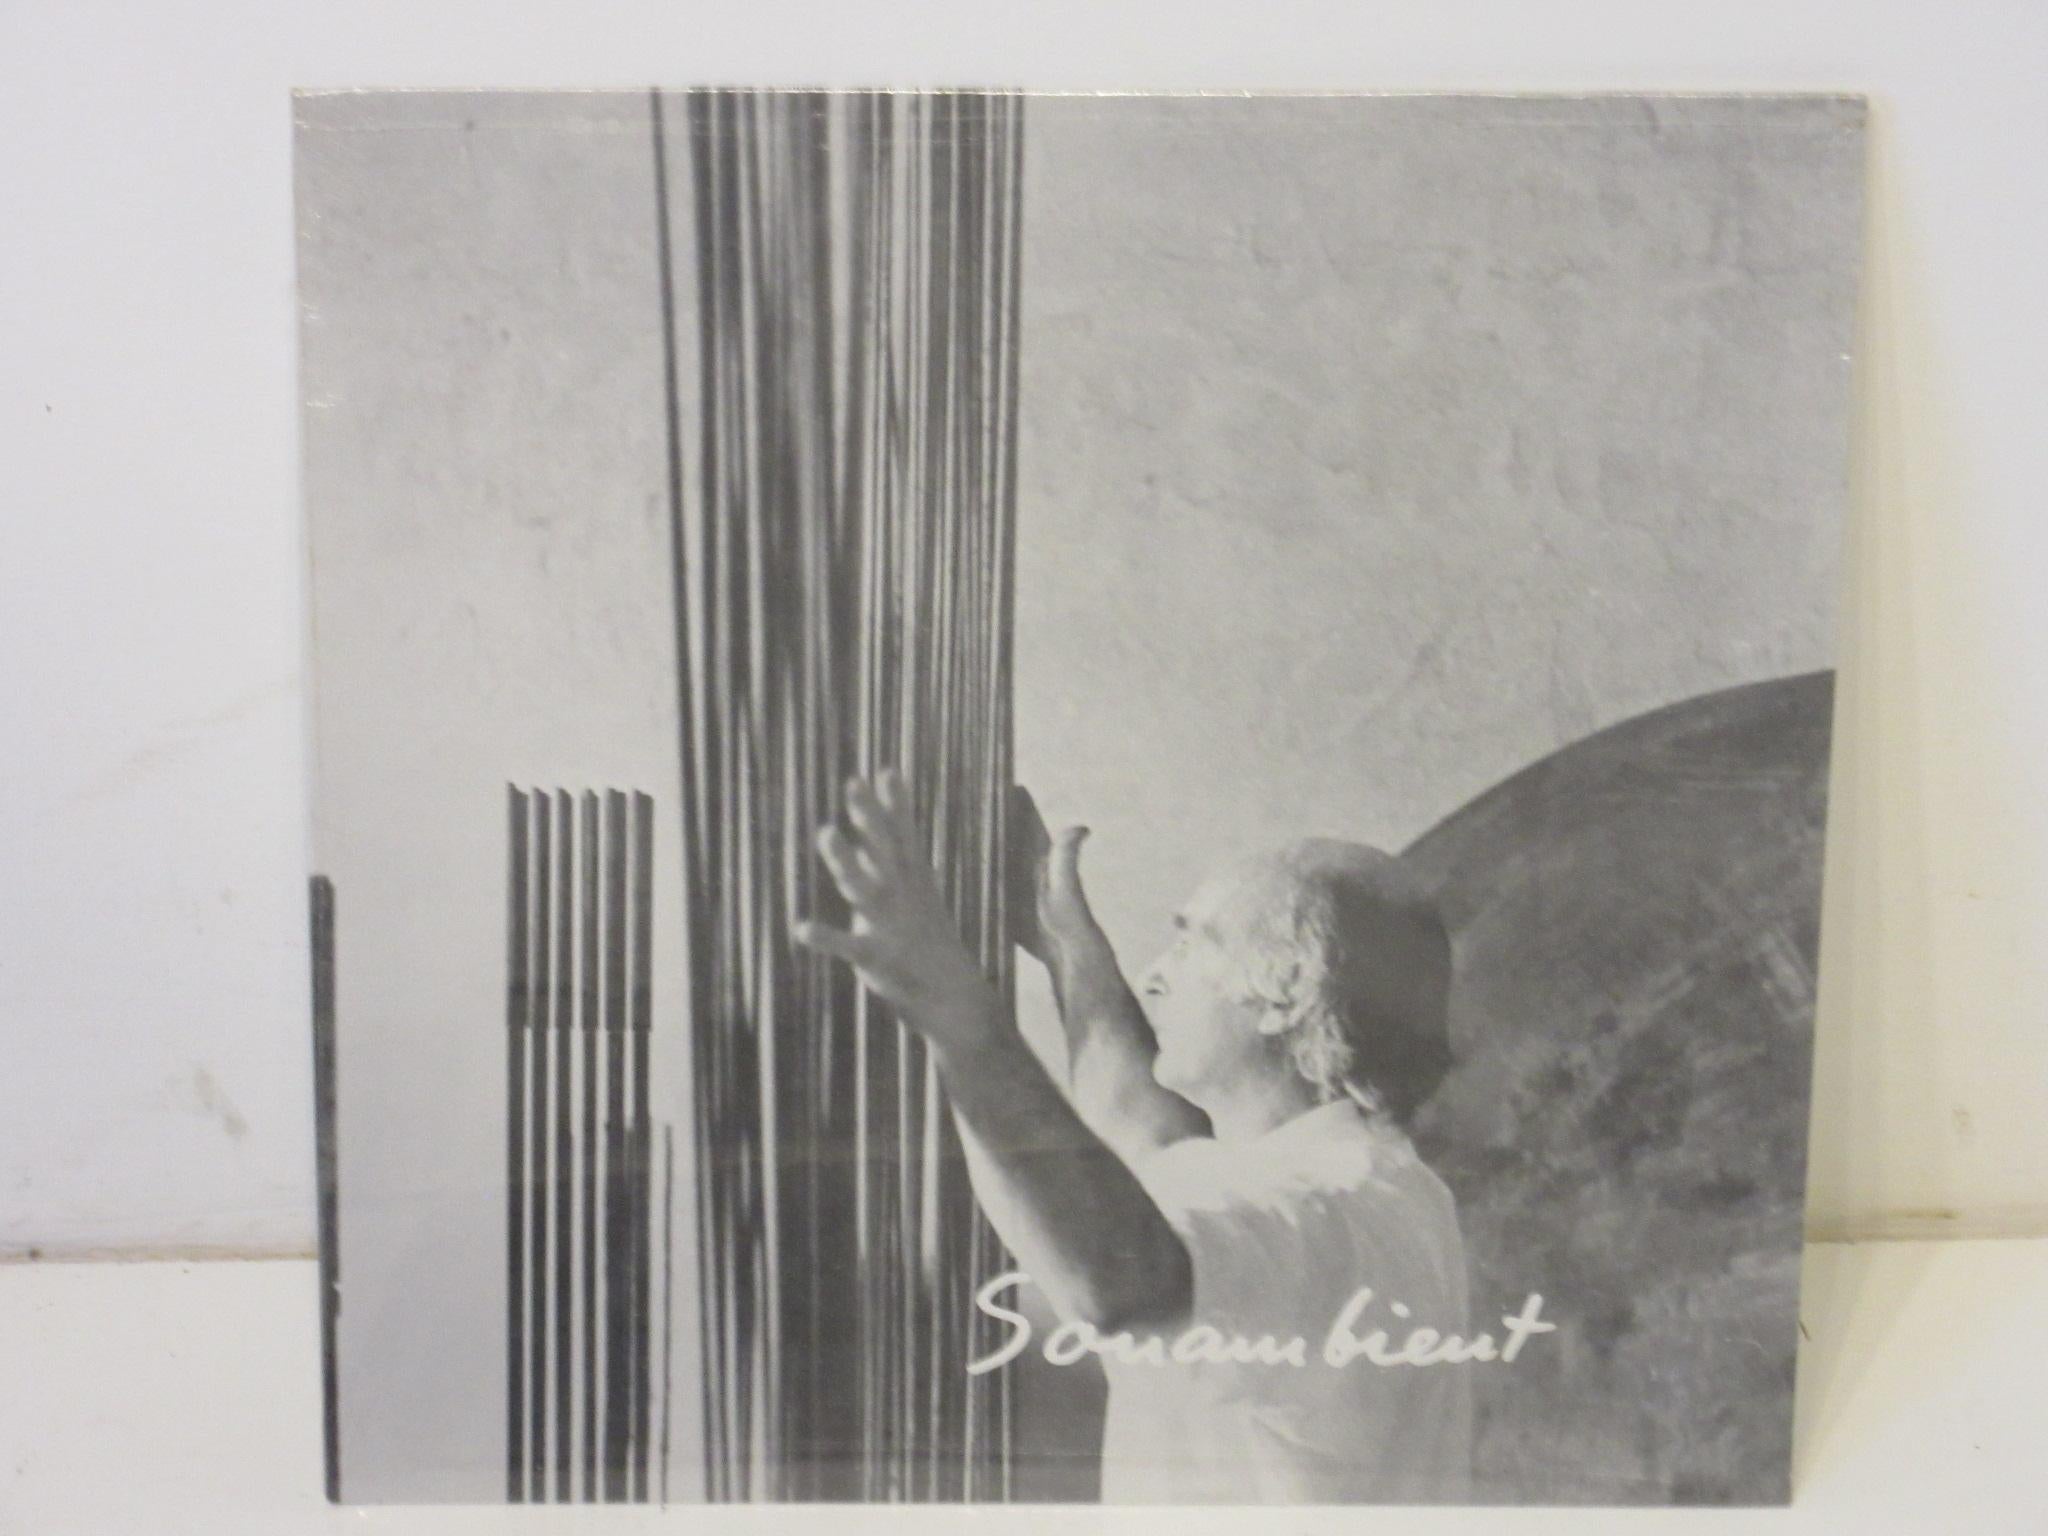 Harry Bertoia Sonambient Sculpture Sound Record Collection 2